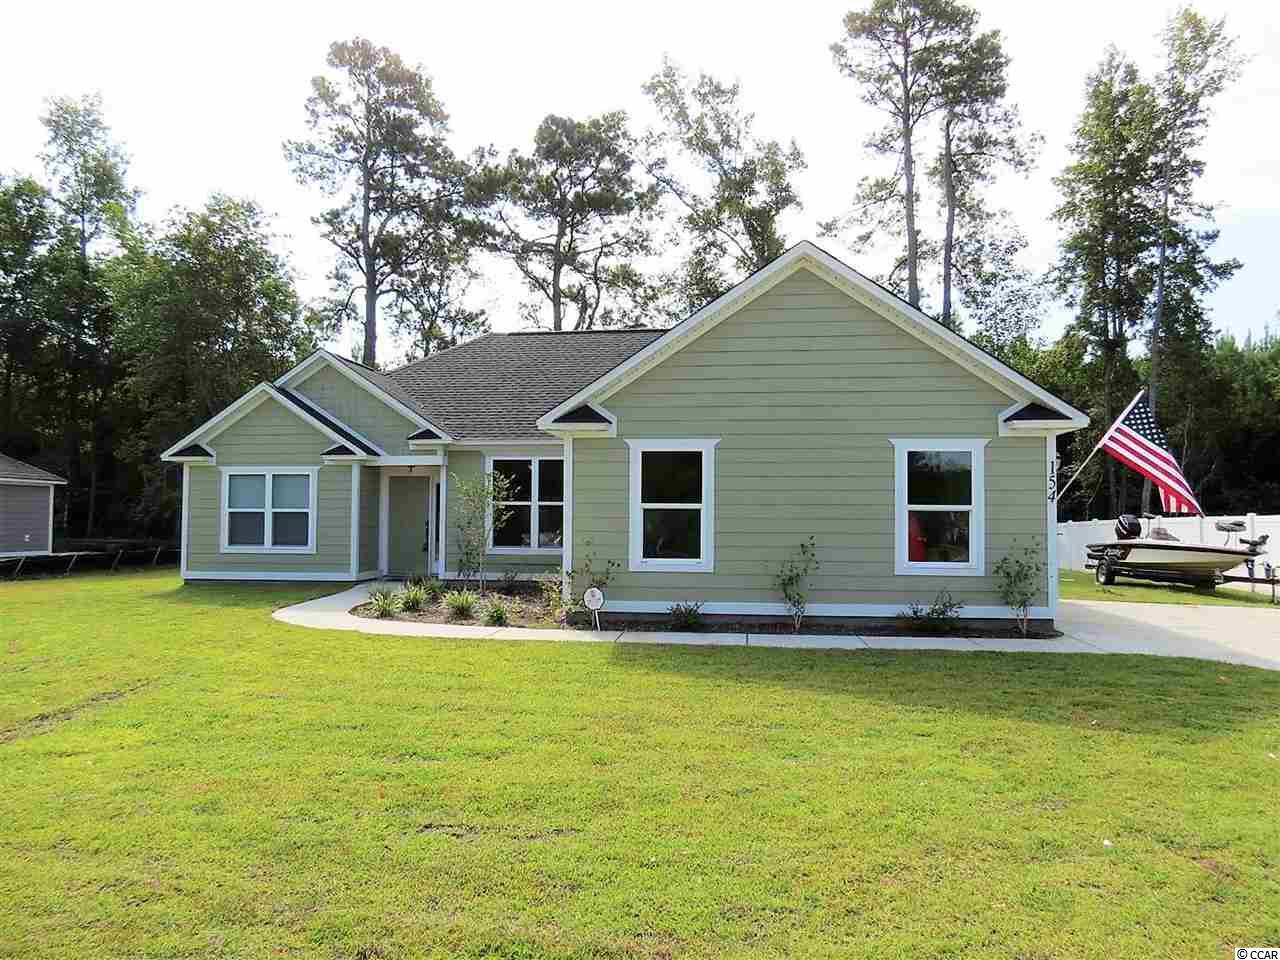 154 Kellys Cove Dr. Conway, SC 29526